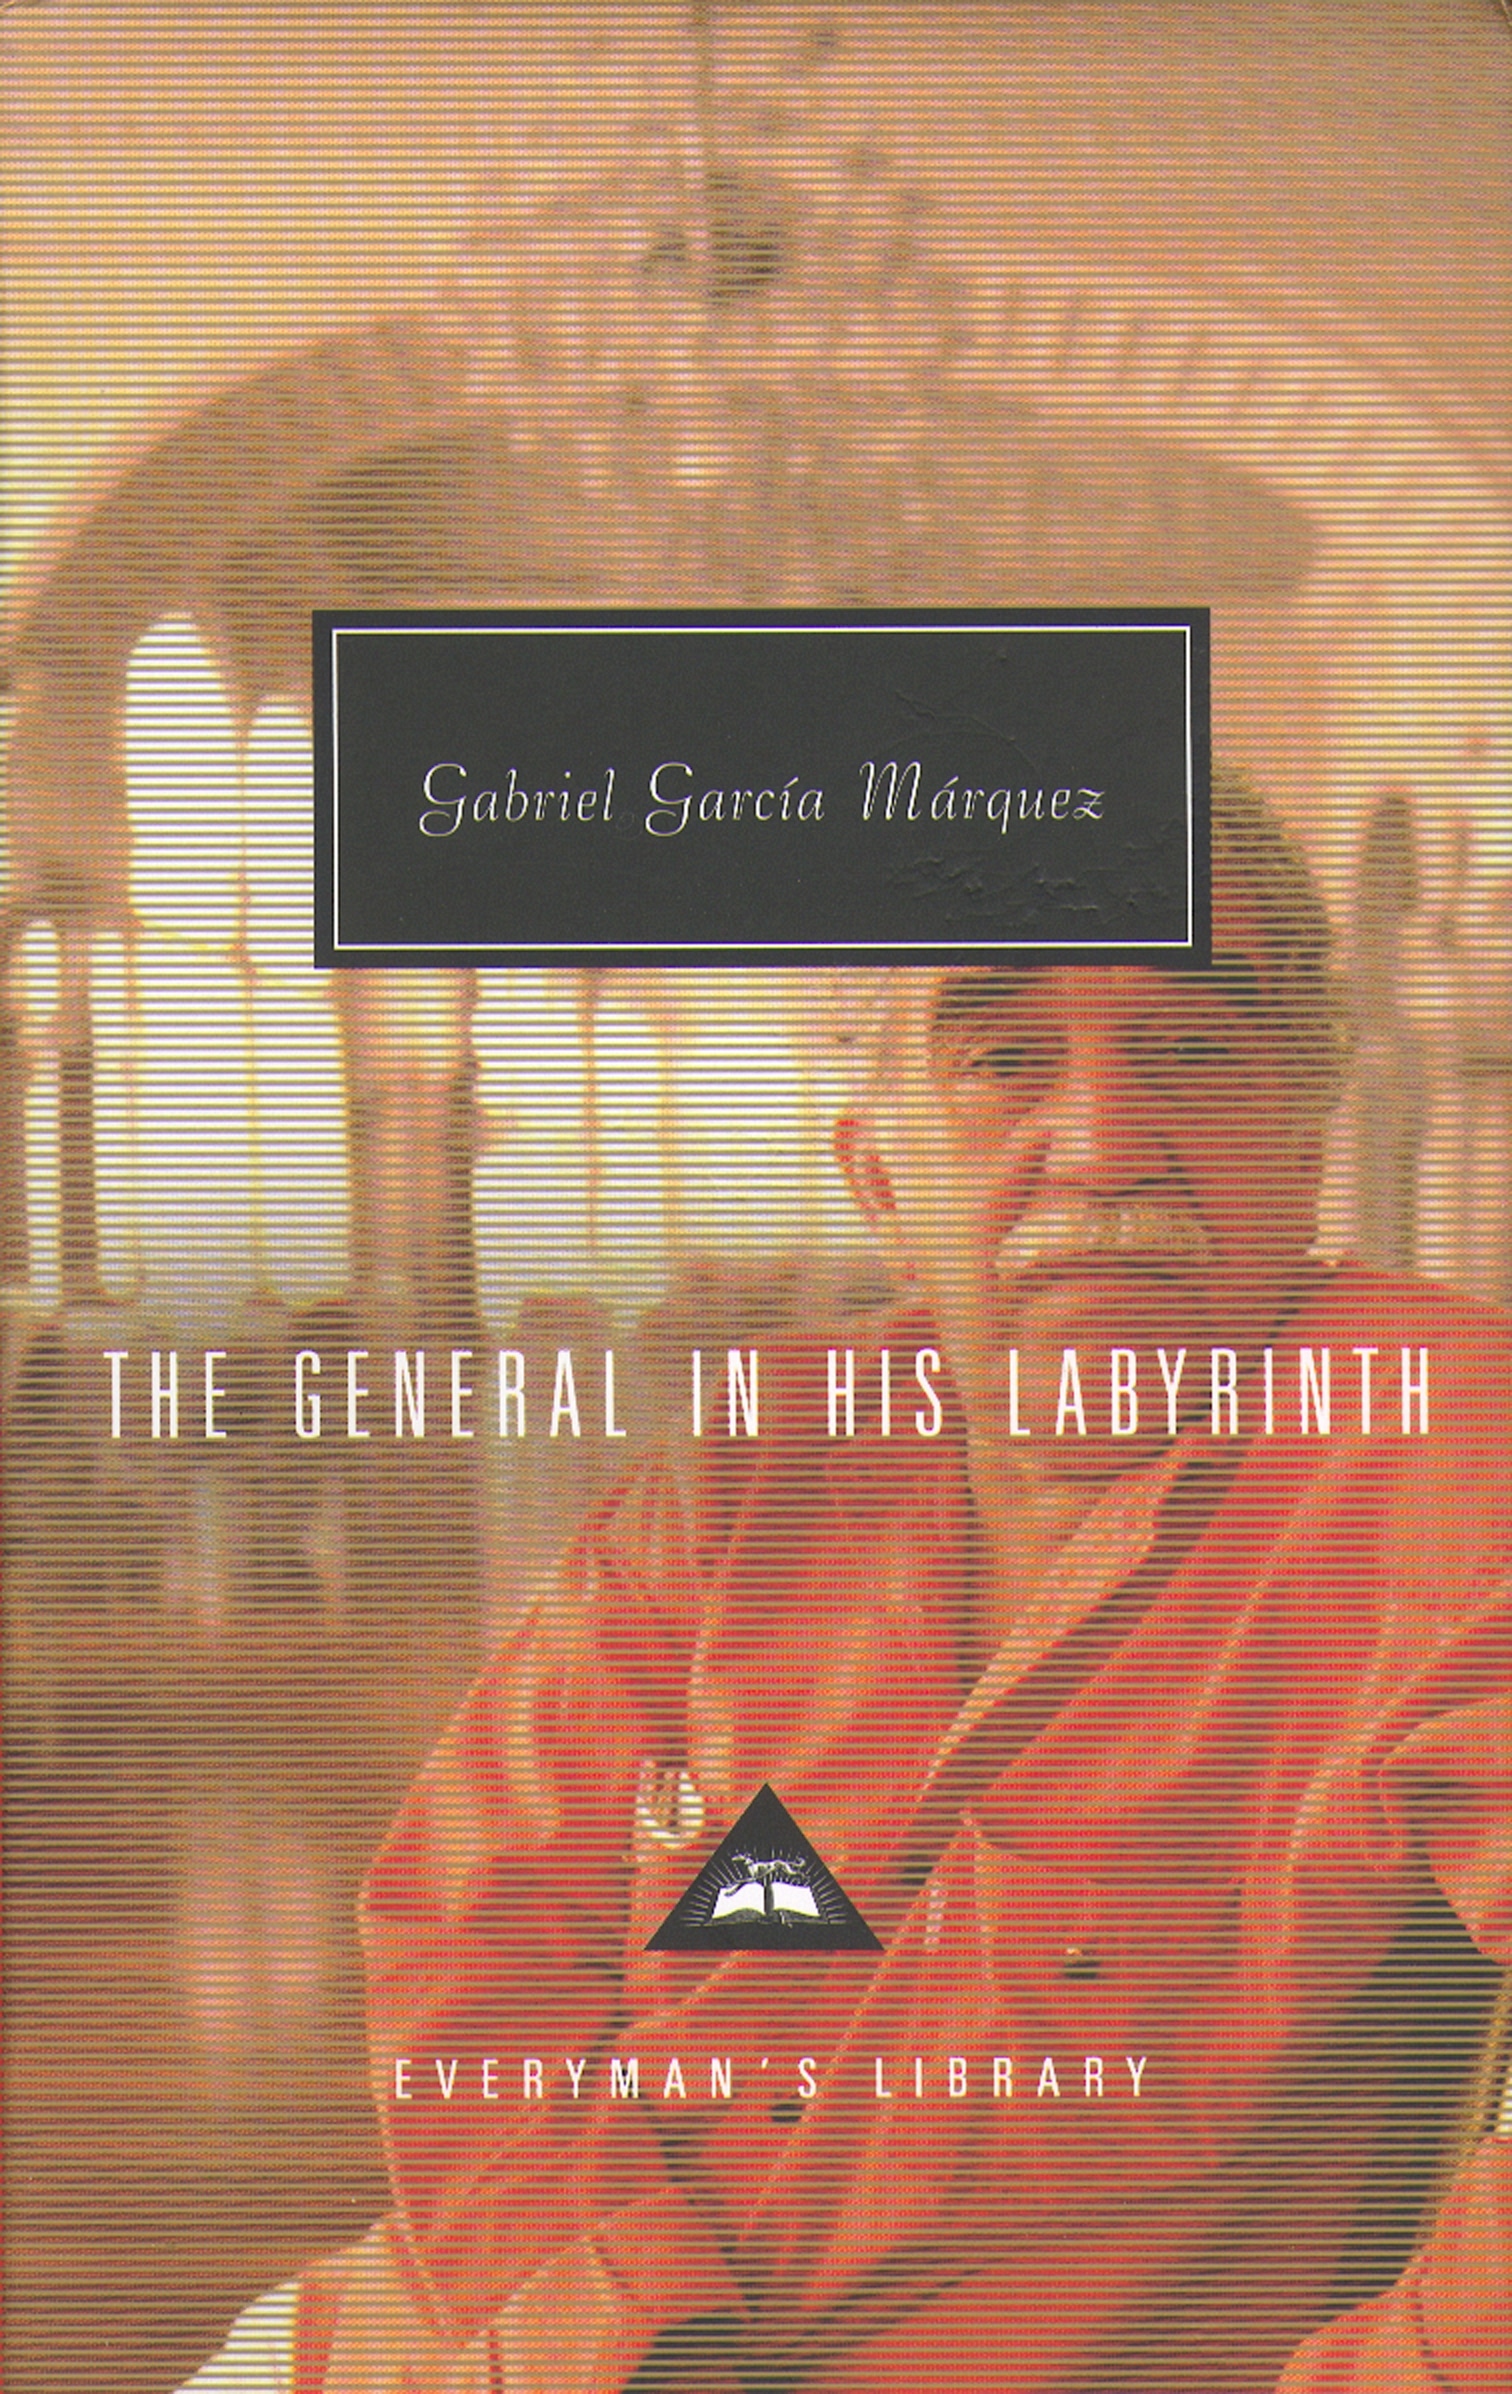 Book “The General in his Labyrinth” by Gabriel Garcia Marquez — September 2, 2004